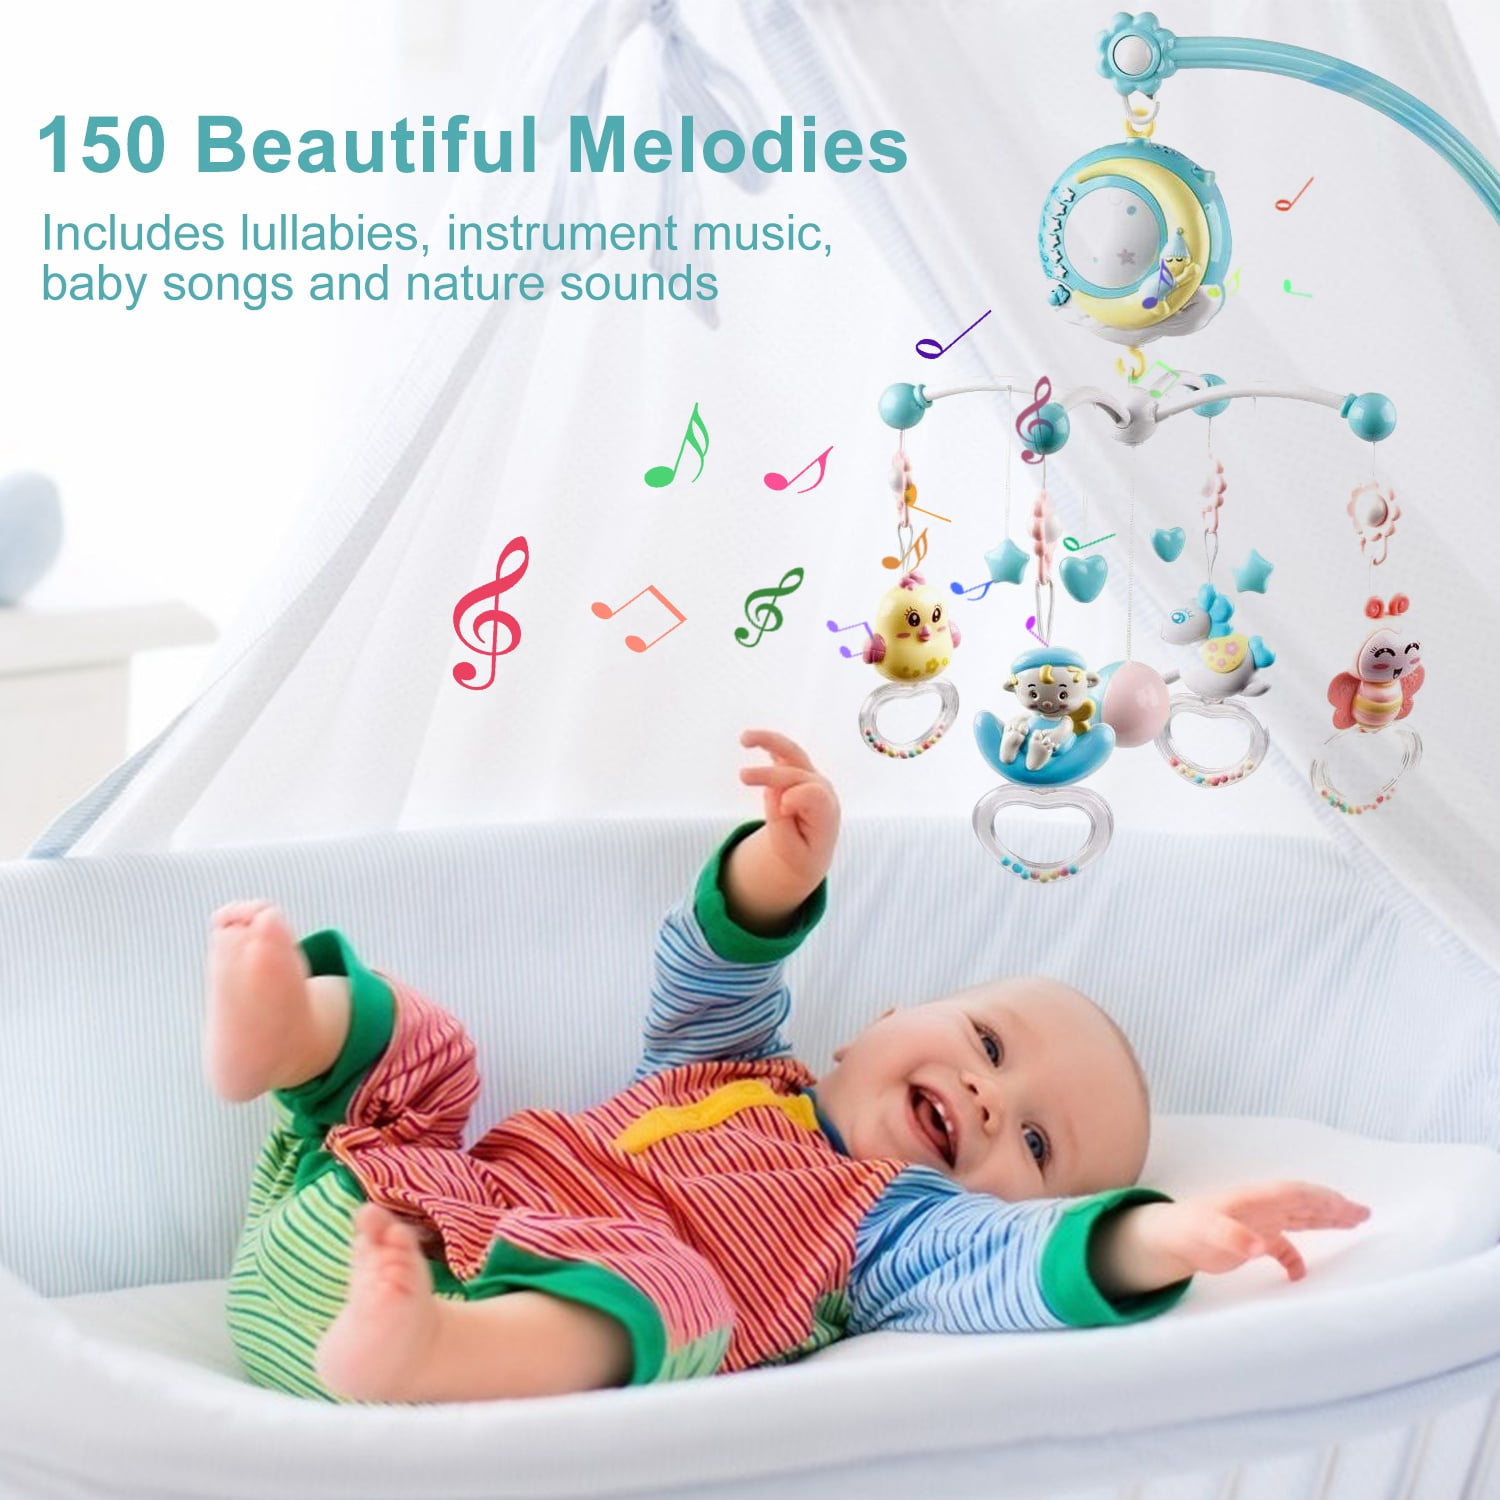 Early Education Musical Mobile Hanging Sleep Toys Crib Bell